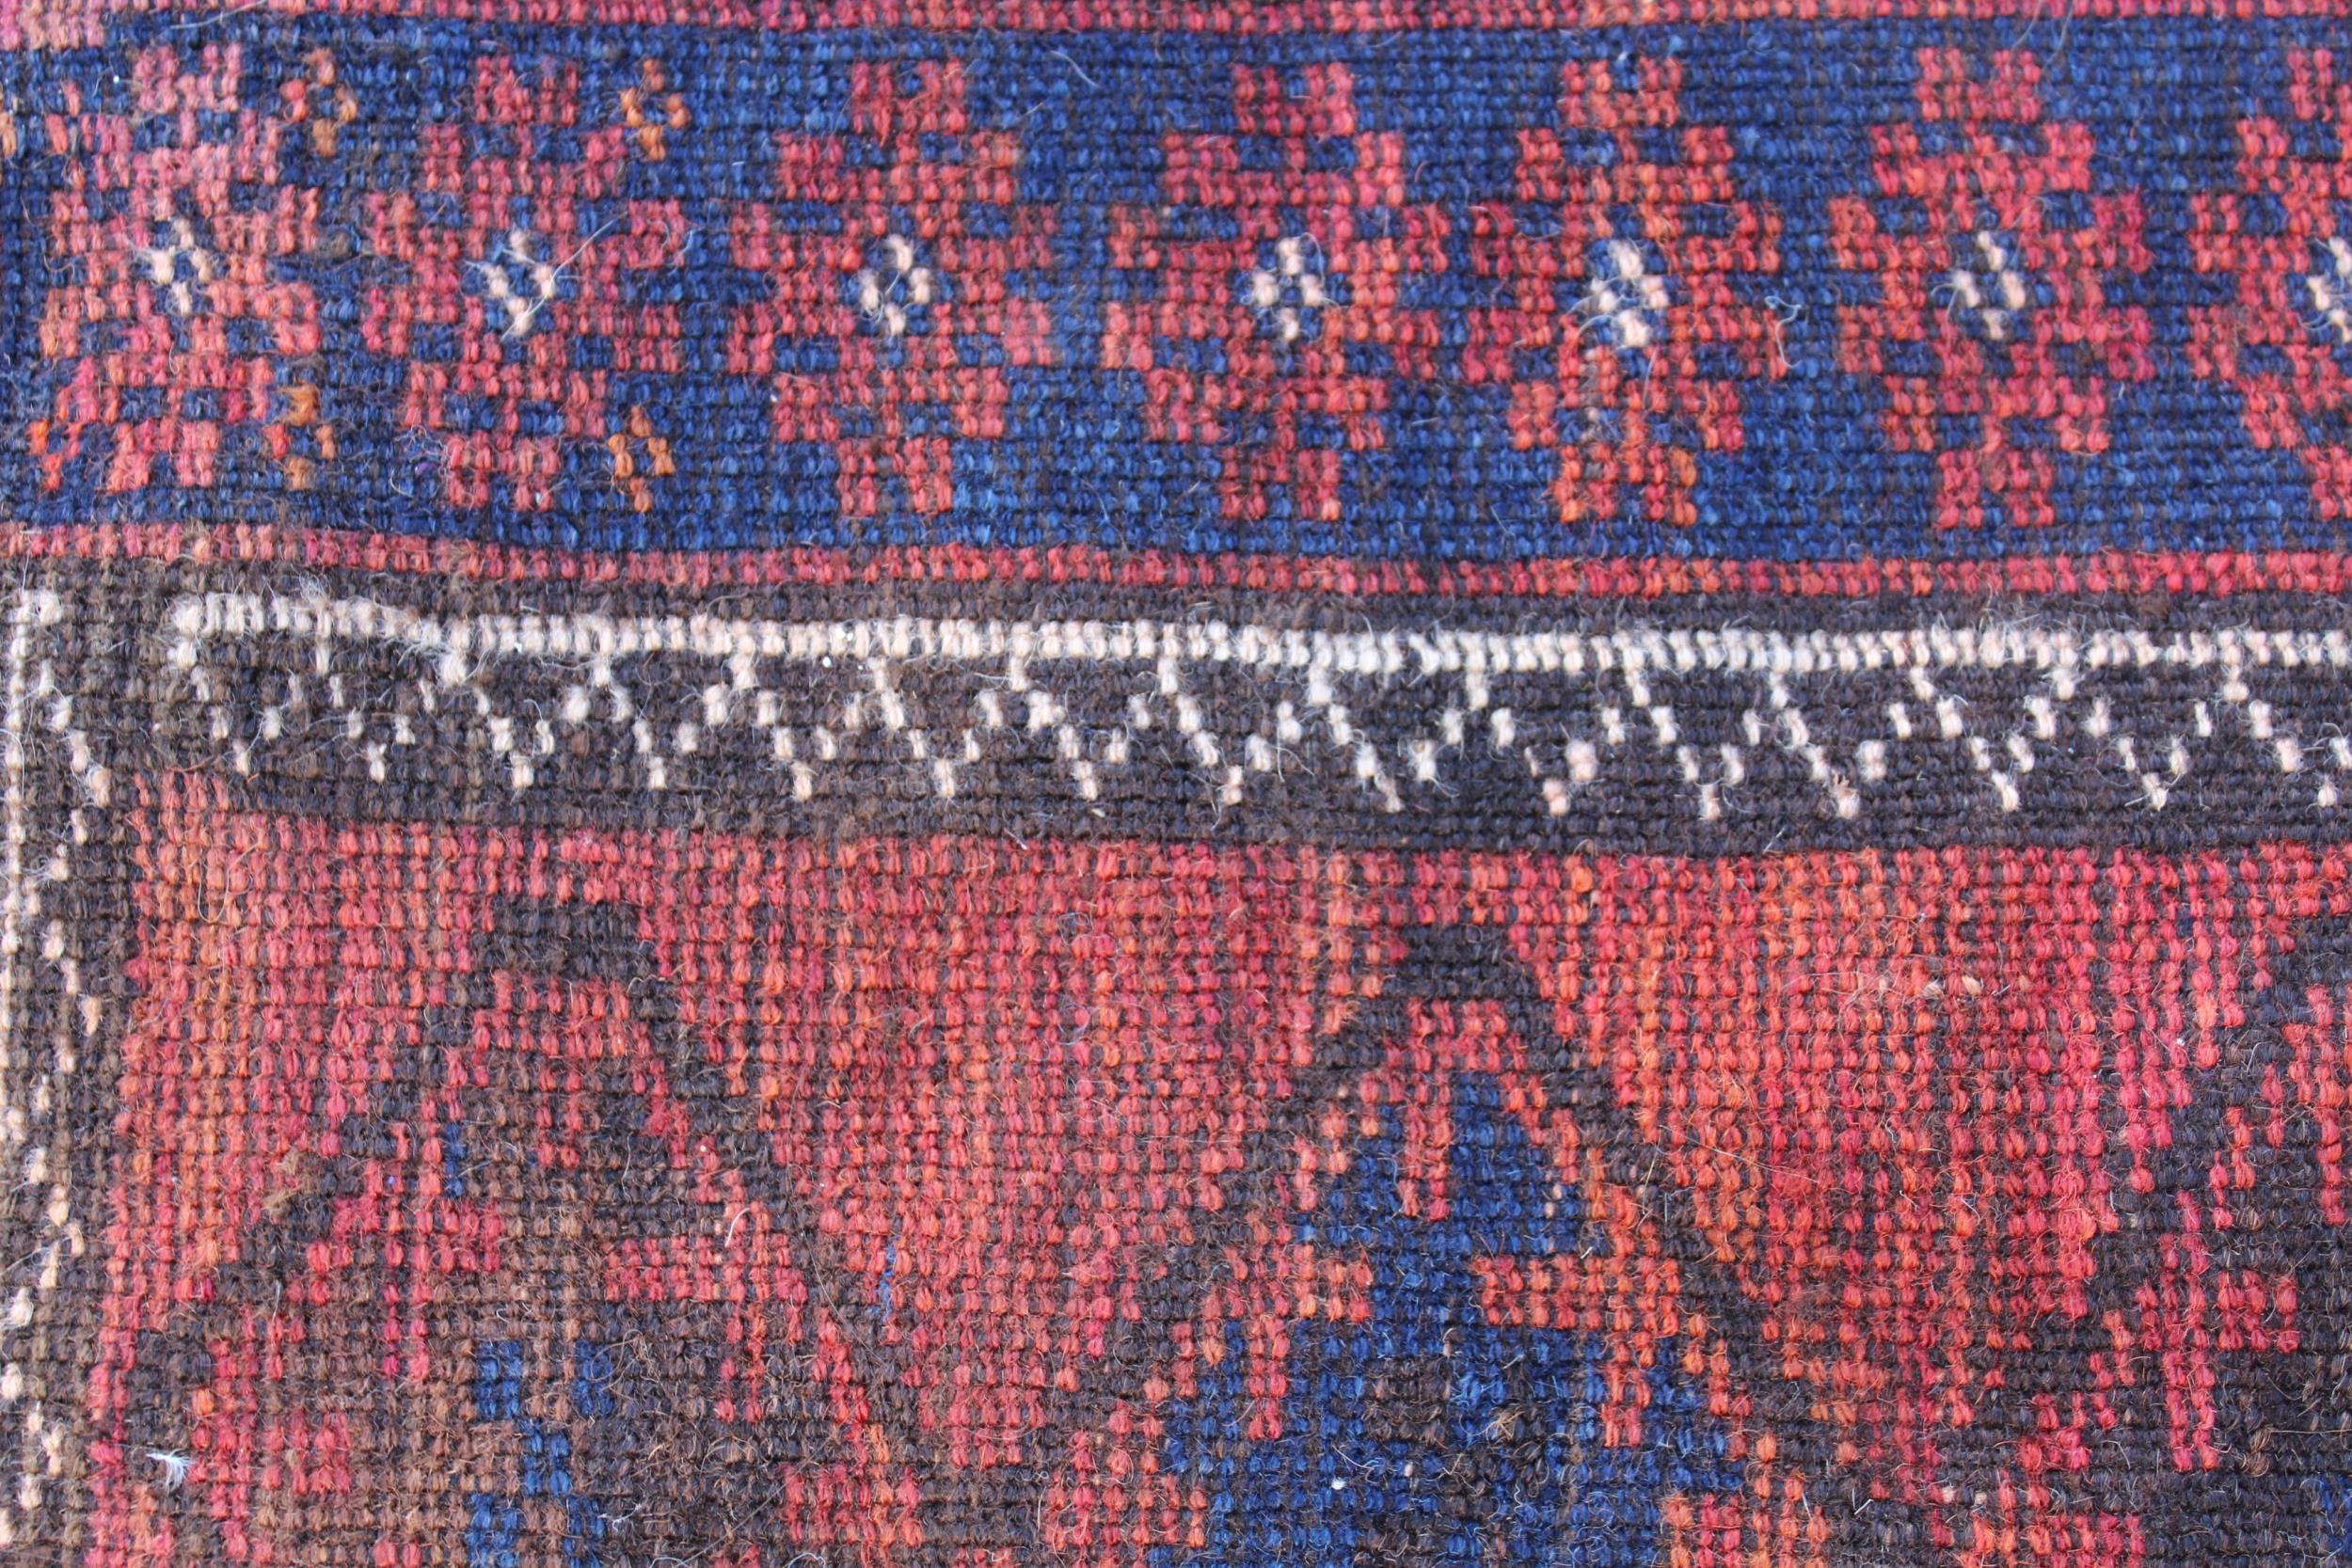 Small Afghan prayer rug, 3ft 8ins x 2ft 8ins approximately - Image 3 of 3